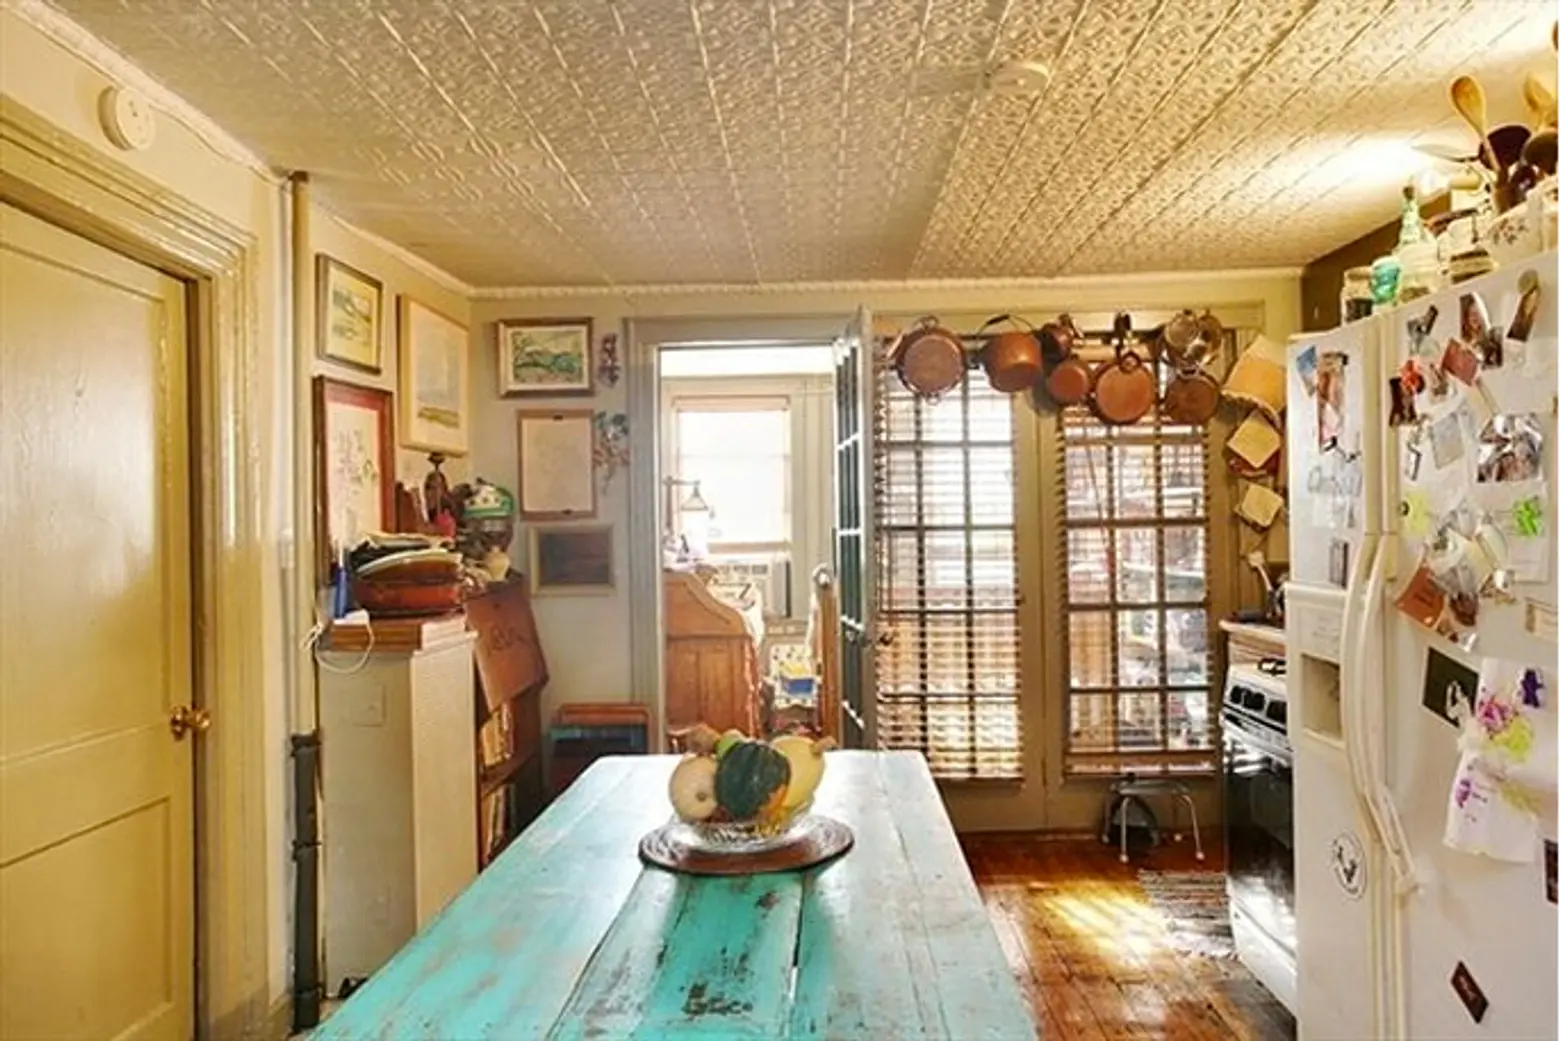 Darling Tin-Ceilinged One-Bedroom in the Heart of Gowanus Asks $2,550/Month